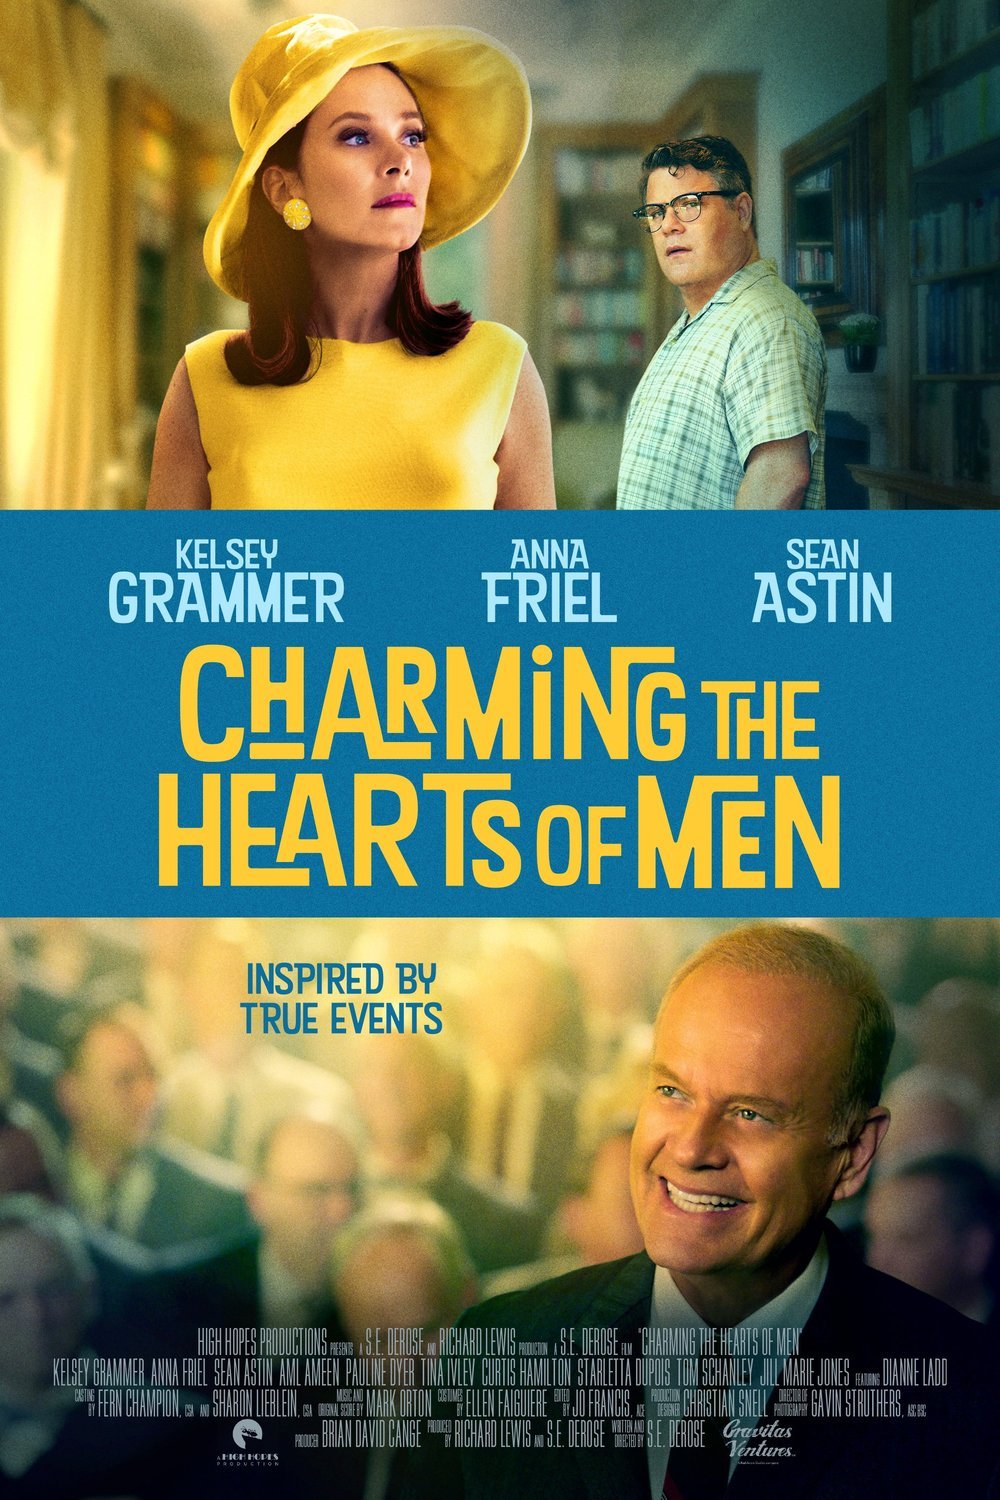 Poster of the movie Charming the Hearts of Men